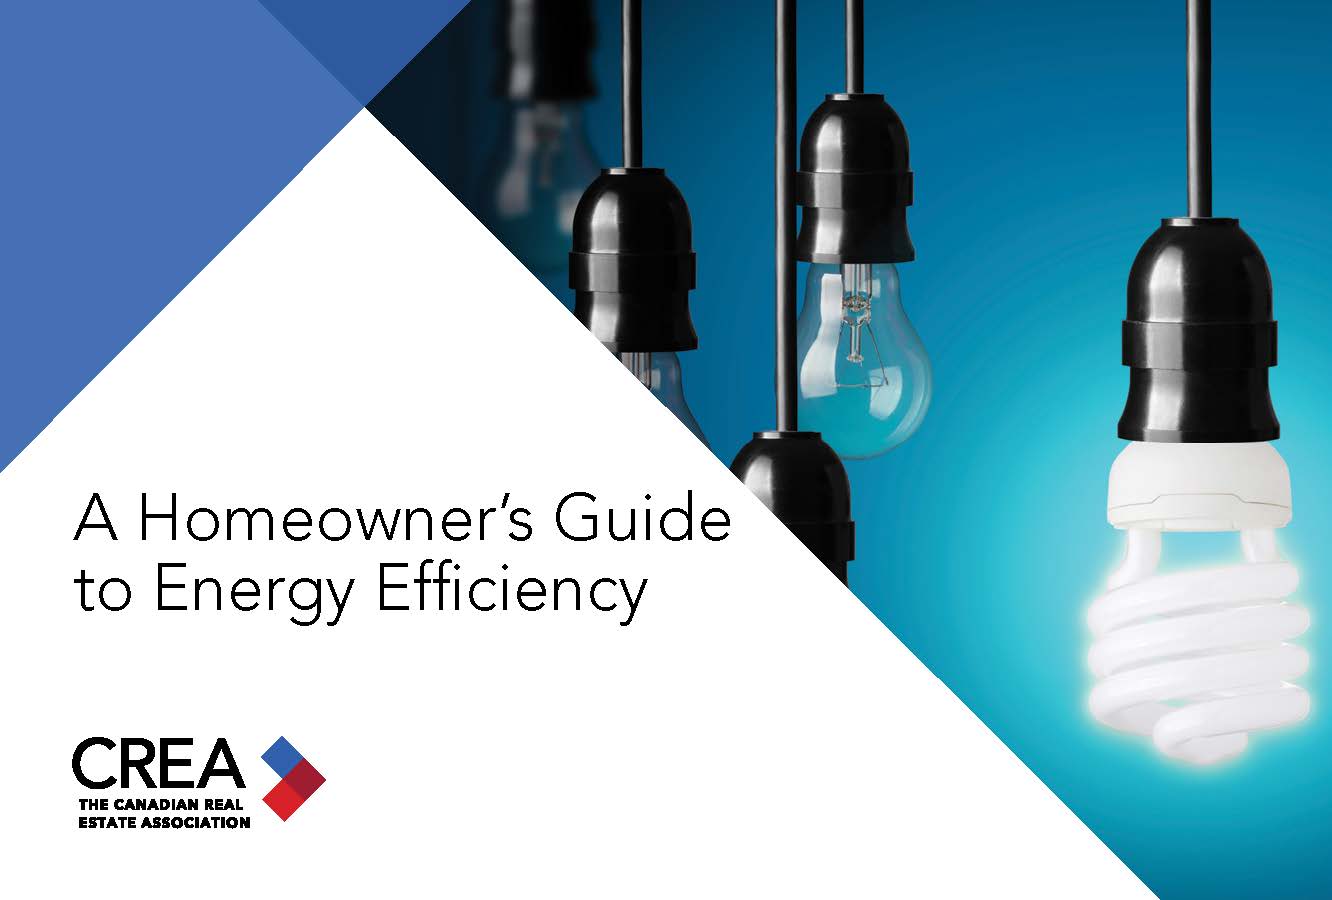 A Homeowner’s Guide to Energy Efficiency